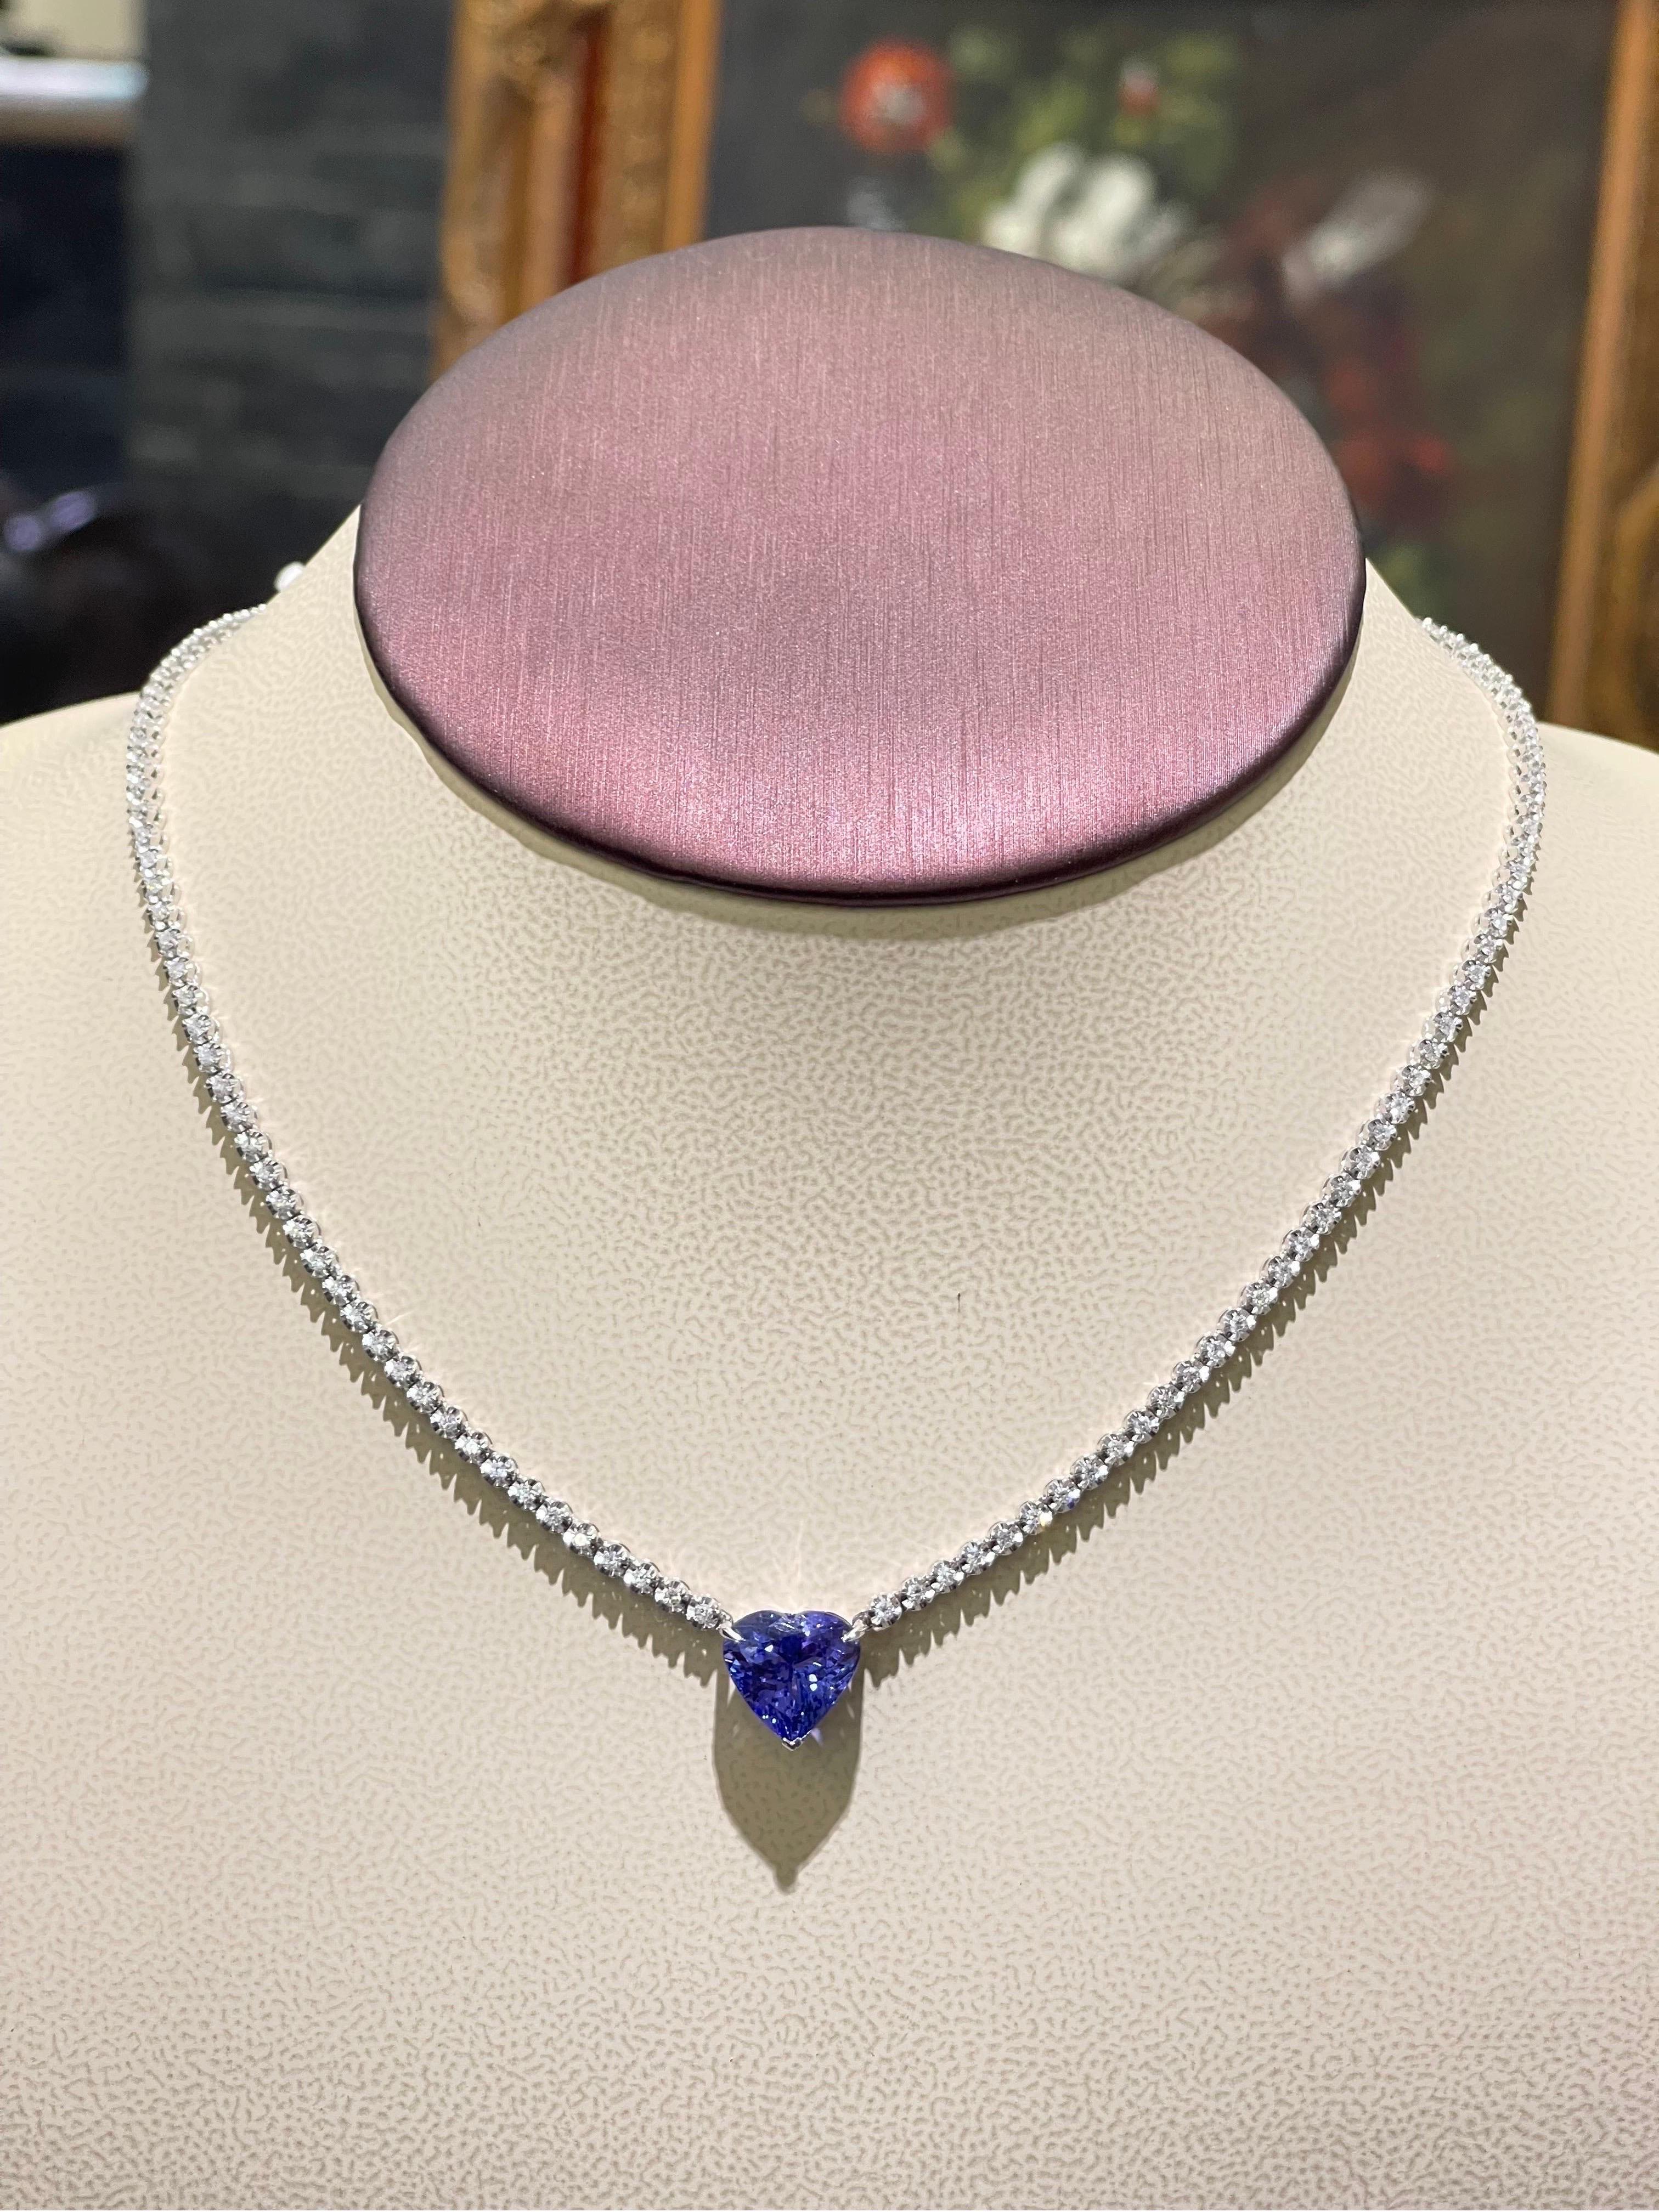 Stunning Tanzanite And Diamond Necklace In 18k White Gold .

- 1.98 diamond total carat weight,

- 4.5 carats heart shaped tanzanite ,

- length of the necklace is 15.75”